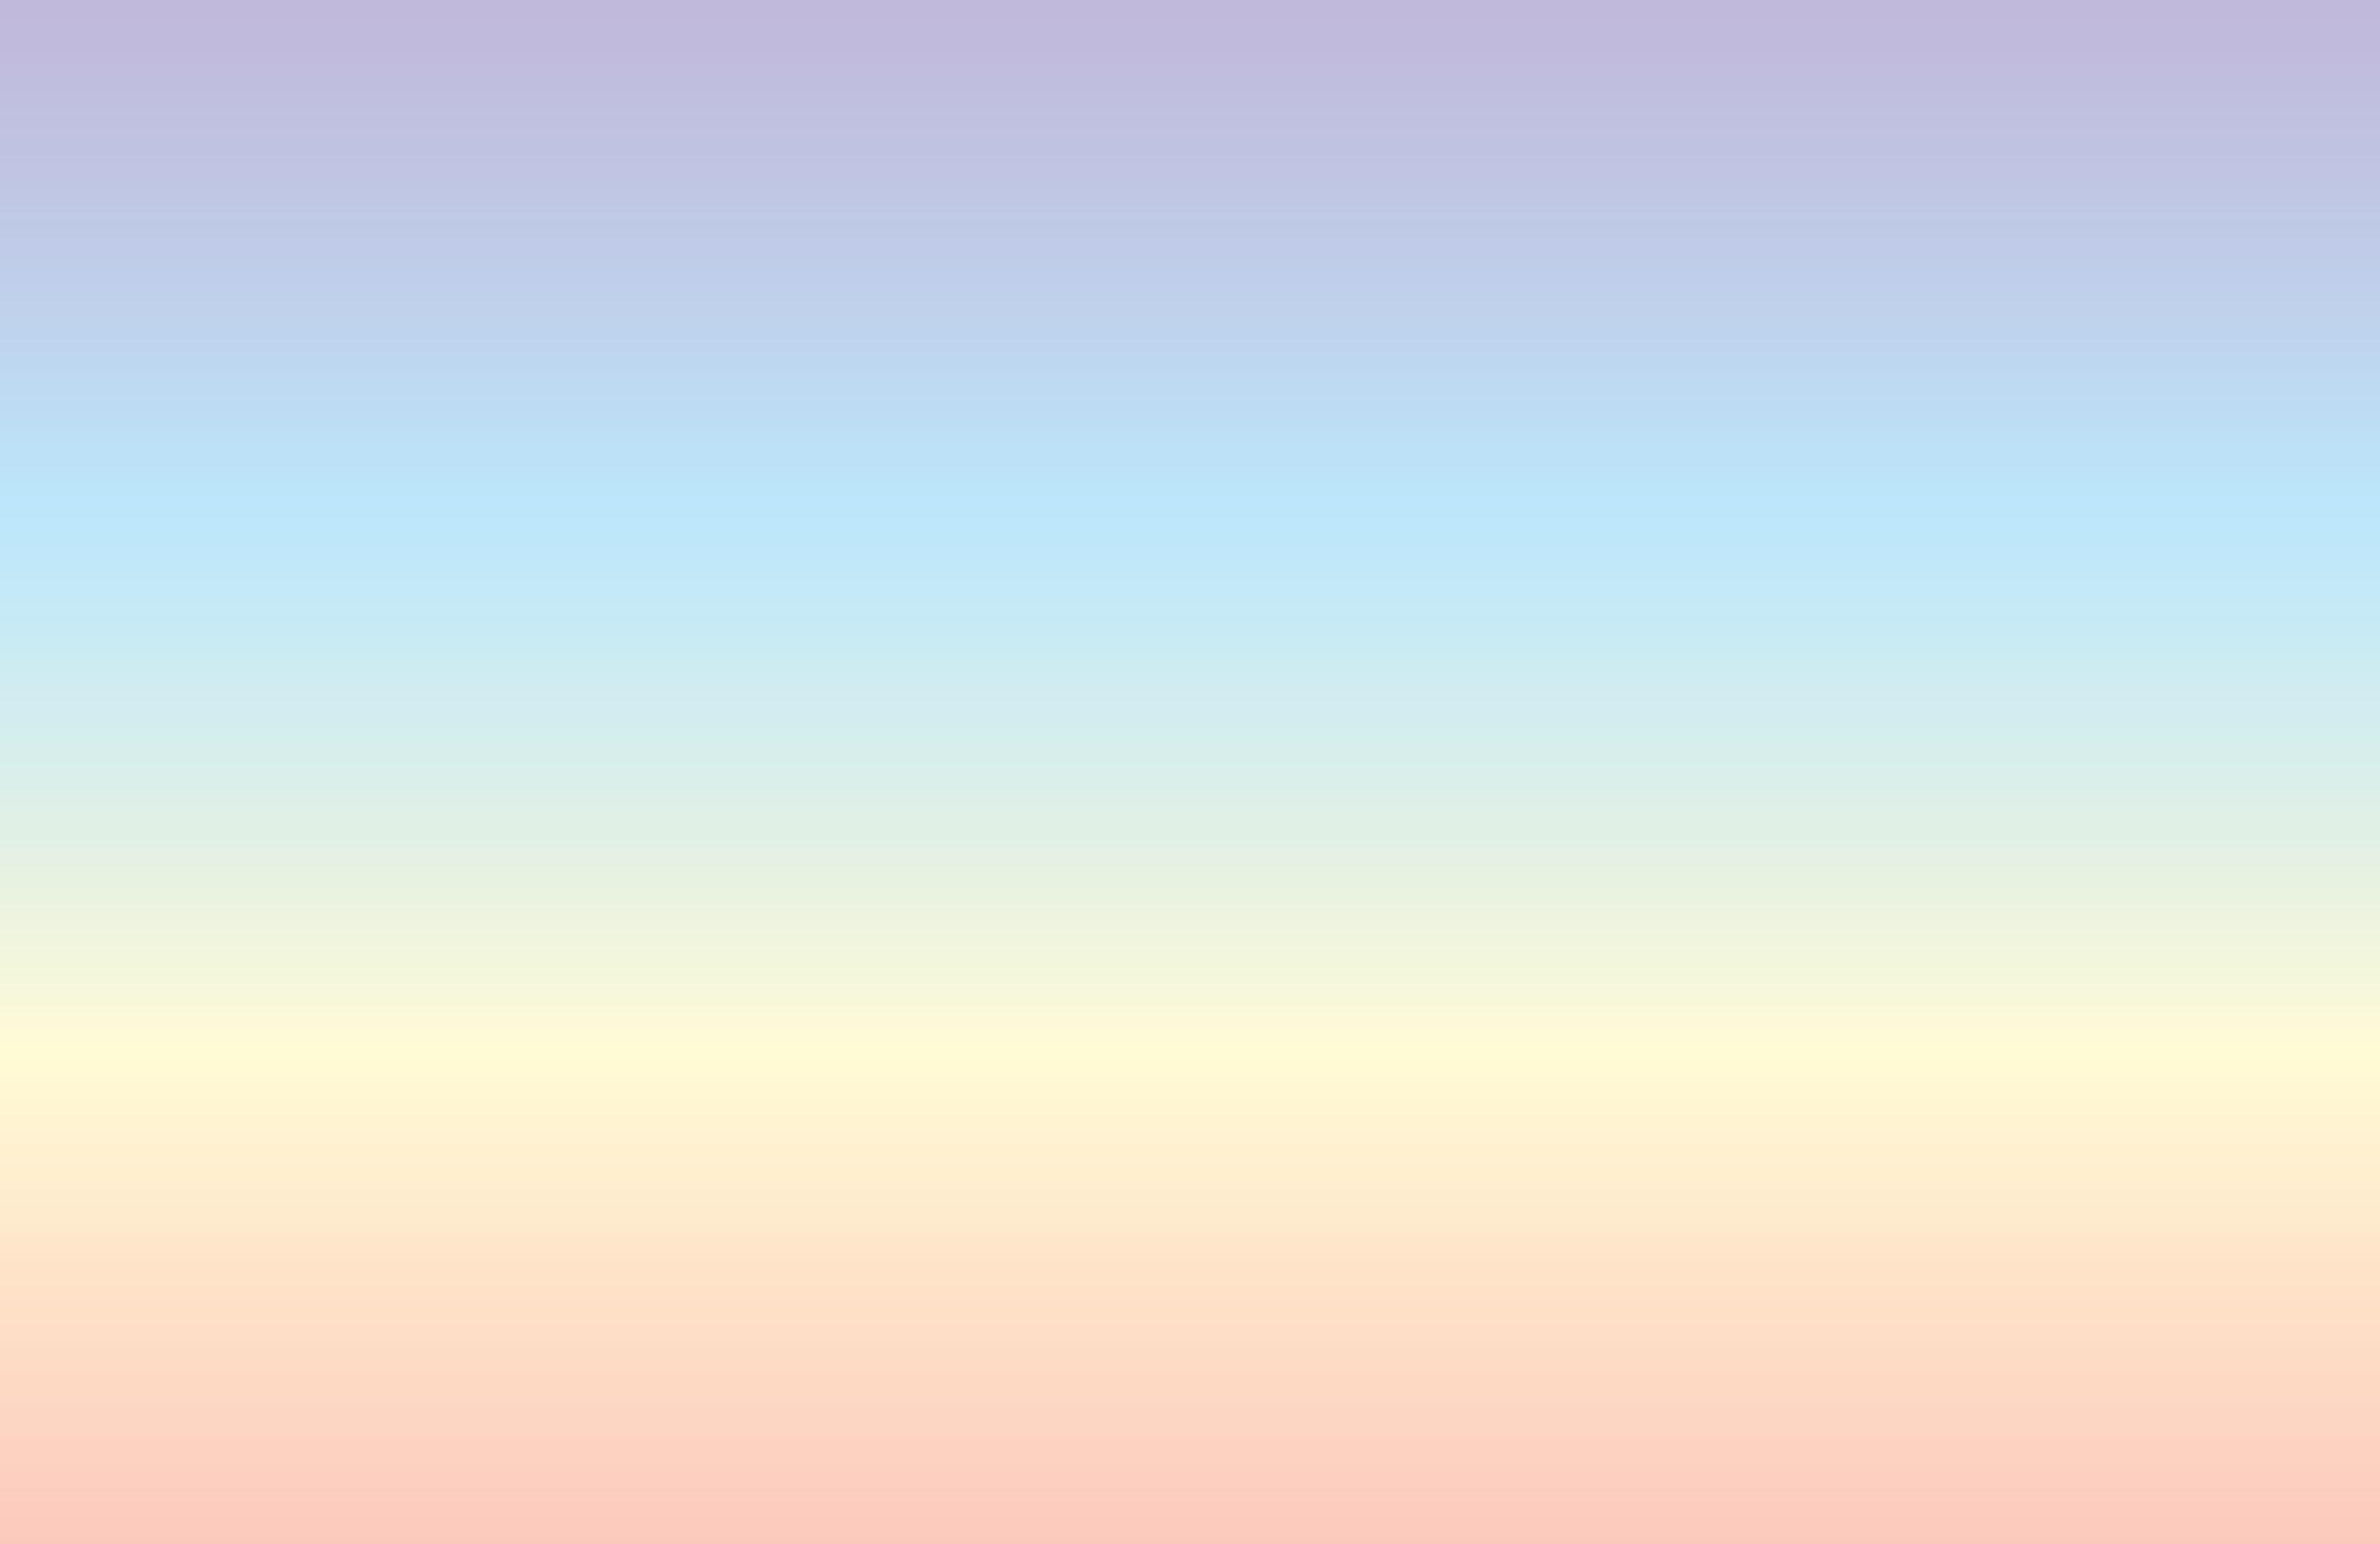 A sunset with a gradient of pastel colors - Pastel rainbow